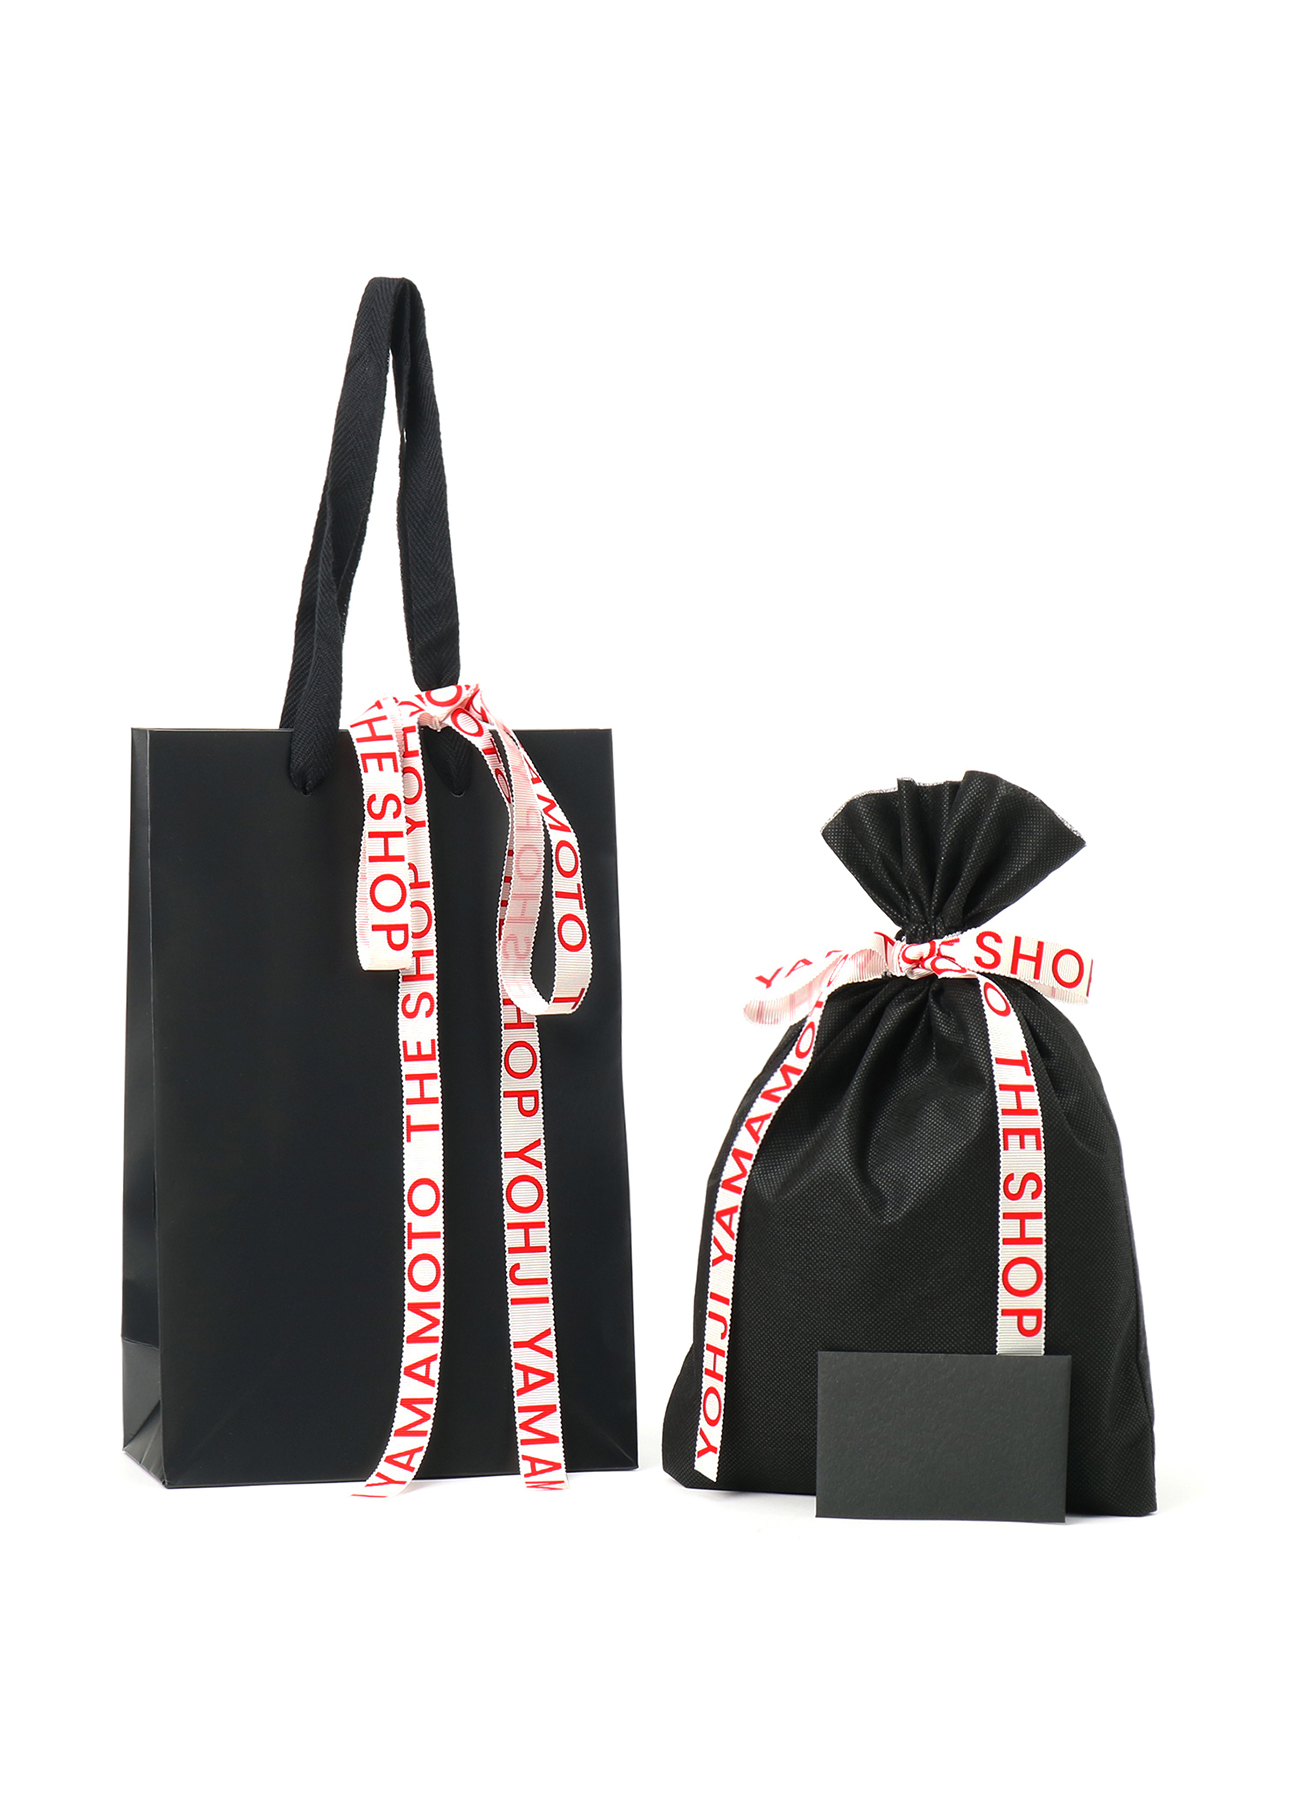 Self-wrap THE SHOP GIFT KIT (S) (WhitexRed)	